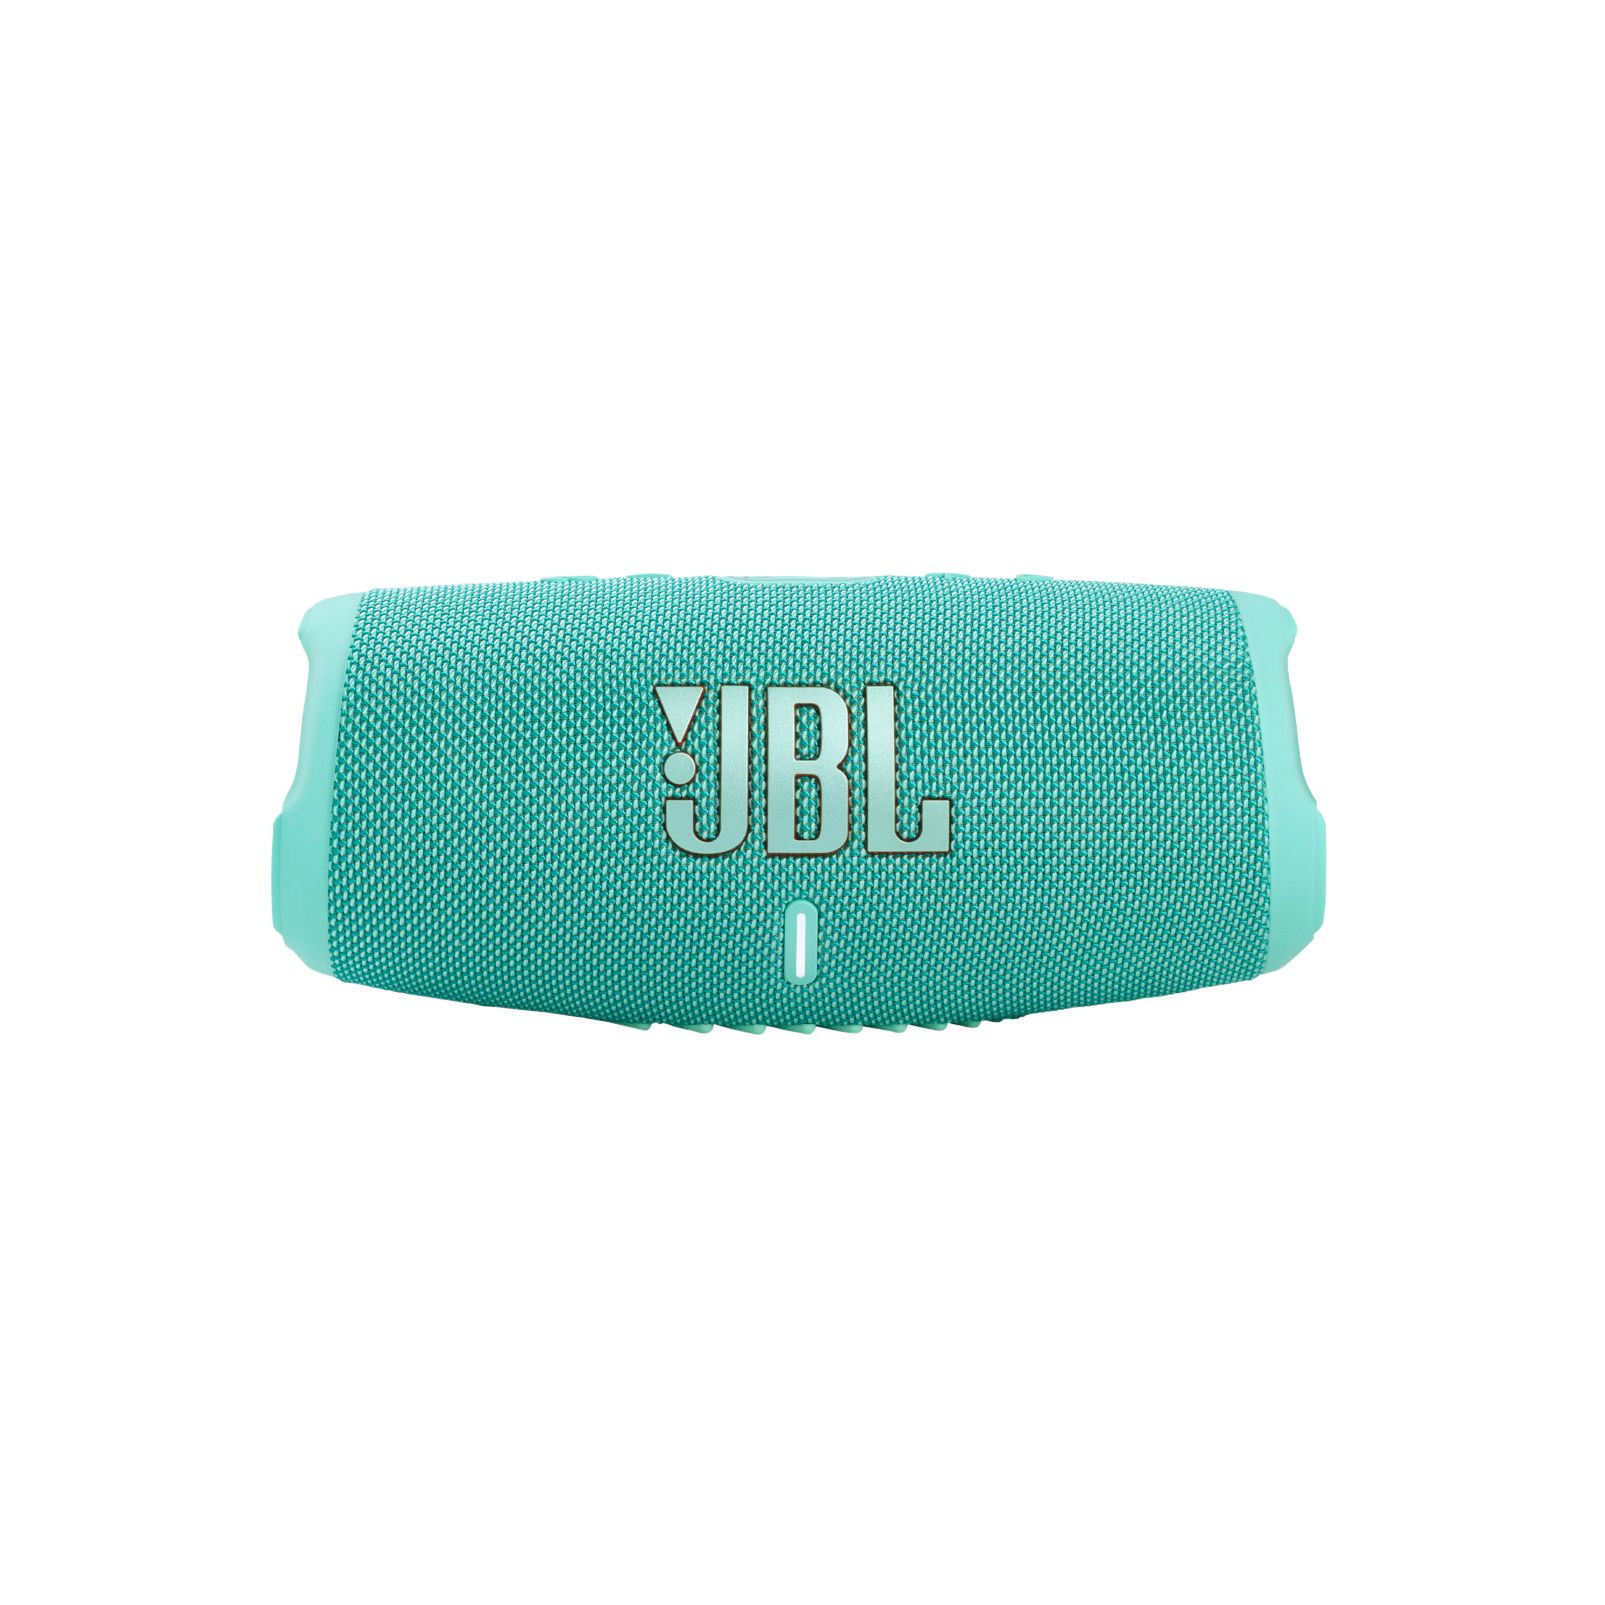  JBL Charge 5 Portable Wireless Bluetooth Speaker with IP67  Waterproof and USB Charge Out - Black (Renewed) : Electronics